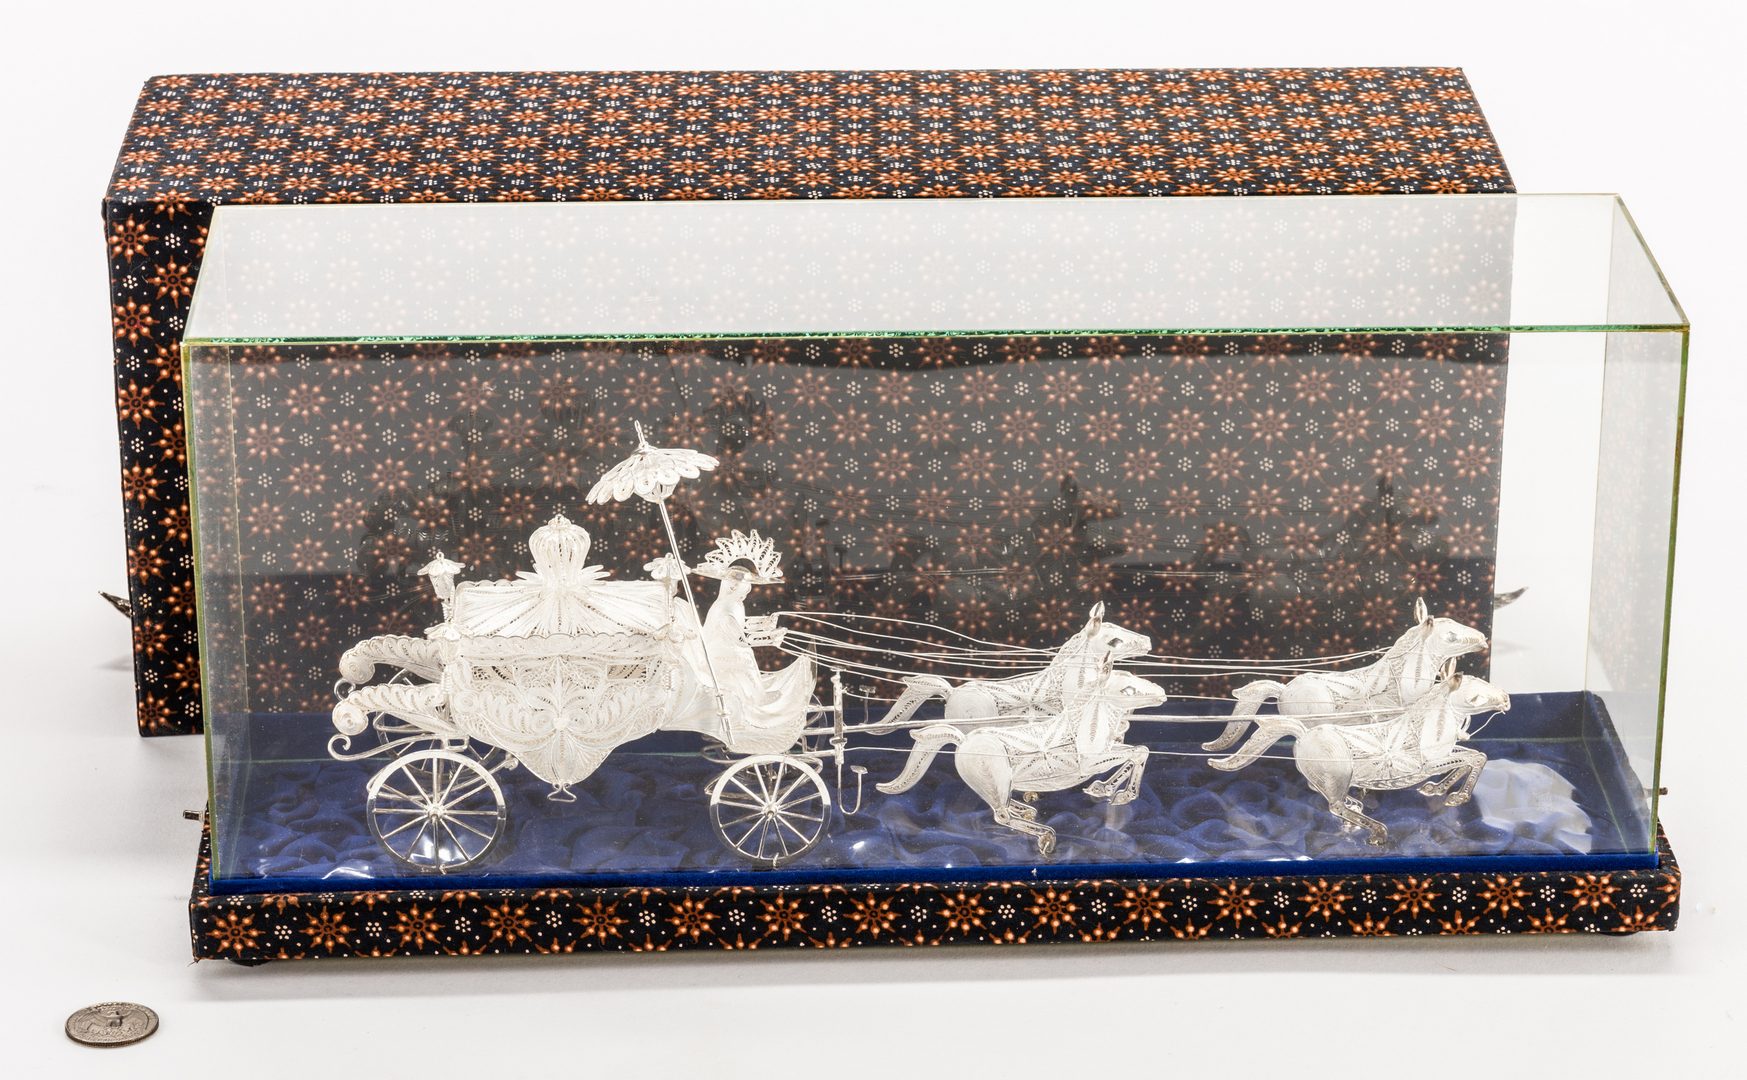 Lot 659: Indonesian or Asian Silver Filigree Carriage w/ Horses